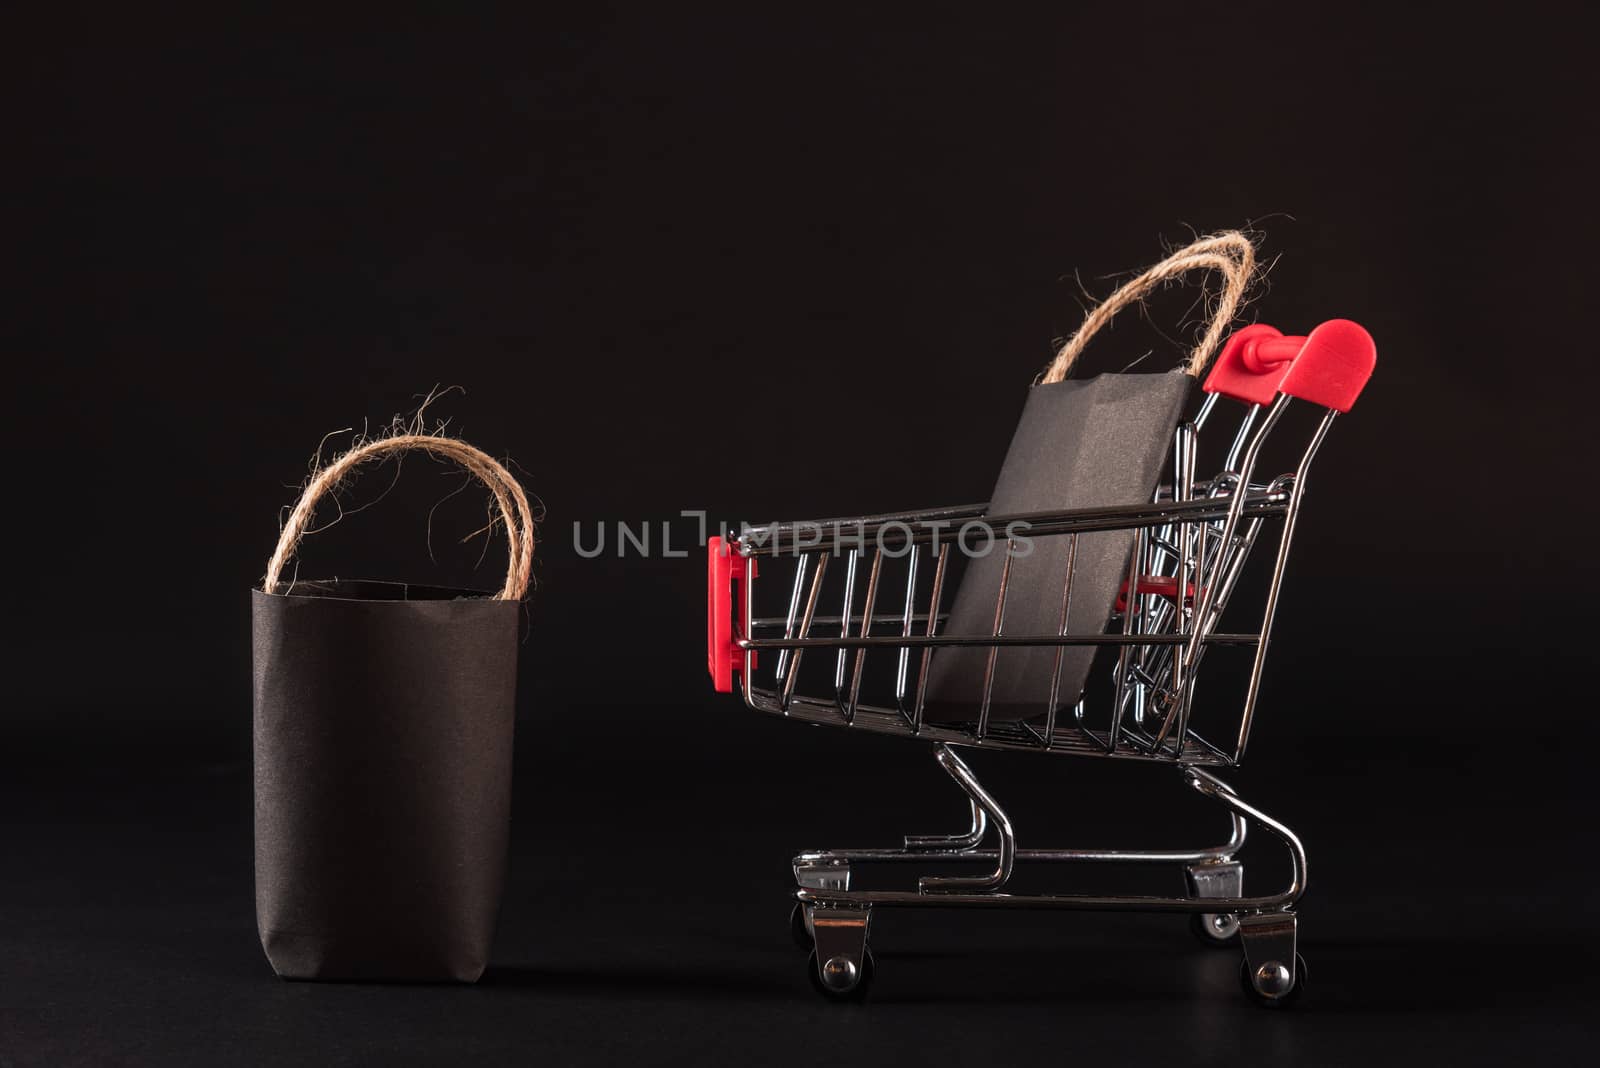 Black Friday sale shopping concept, Black shopping bags in a shopping cart, studio shot isolated on black background